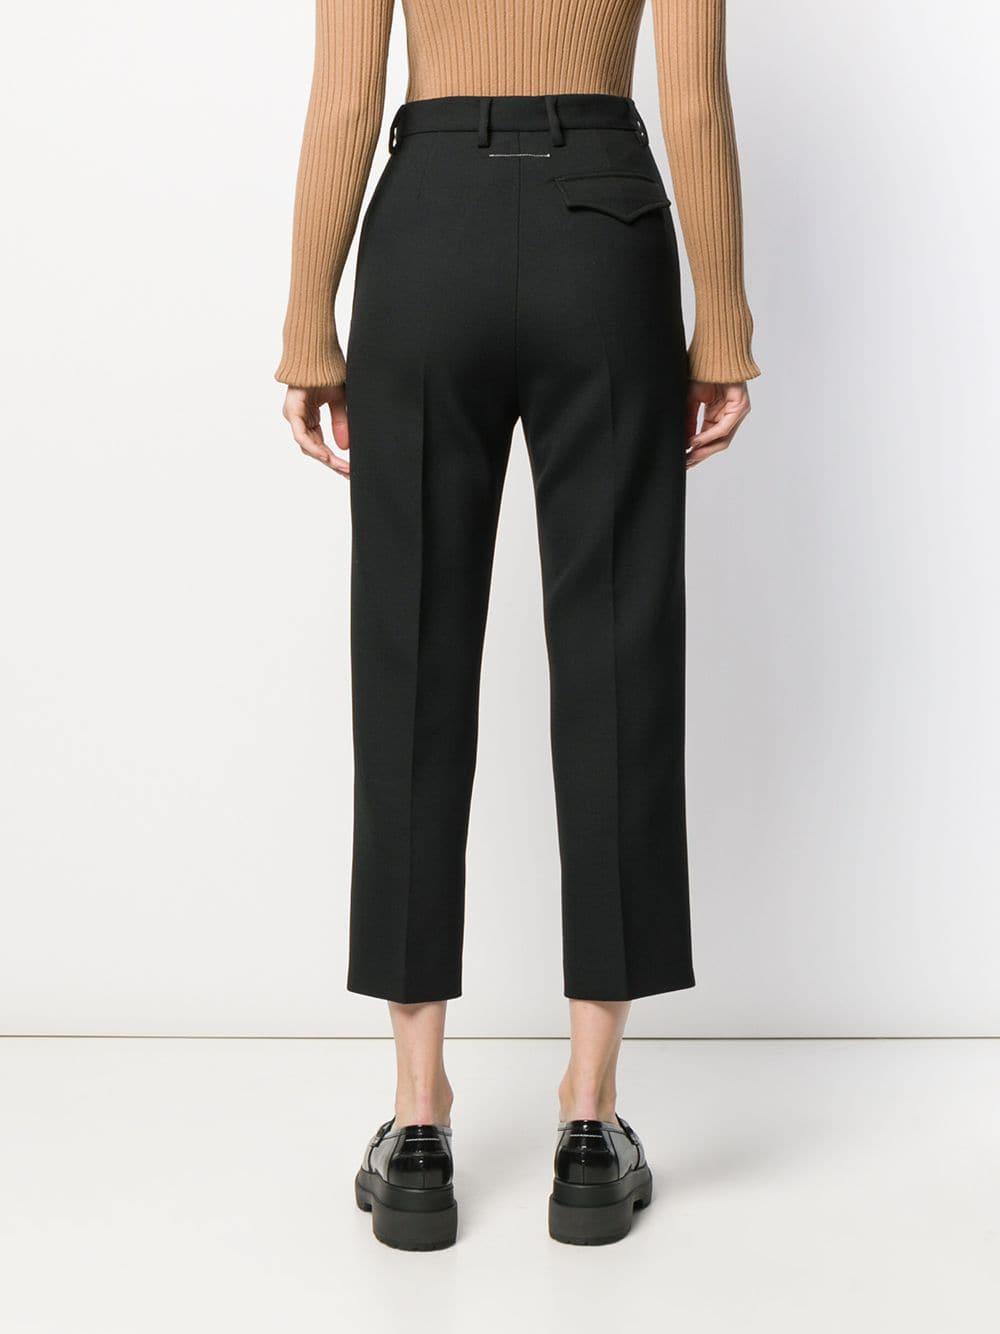 MM6 by Maison Martin Margiela Cropped Trousers in Black - Lyst